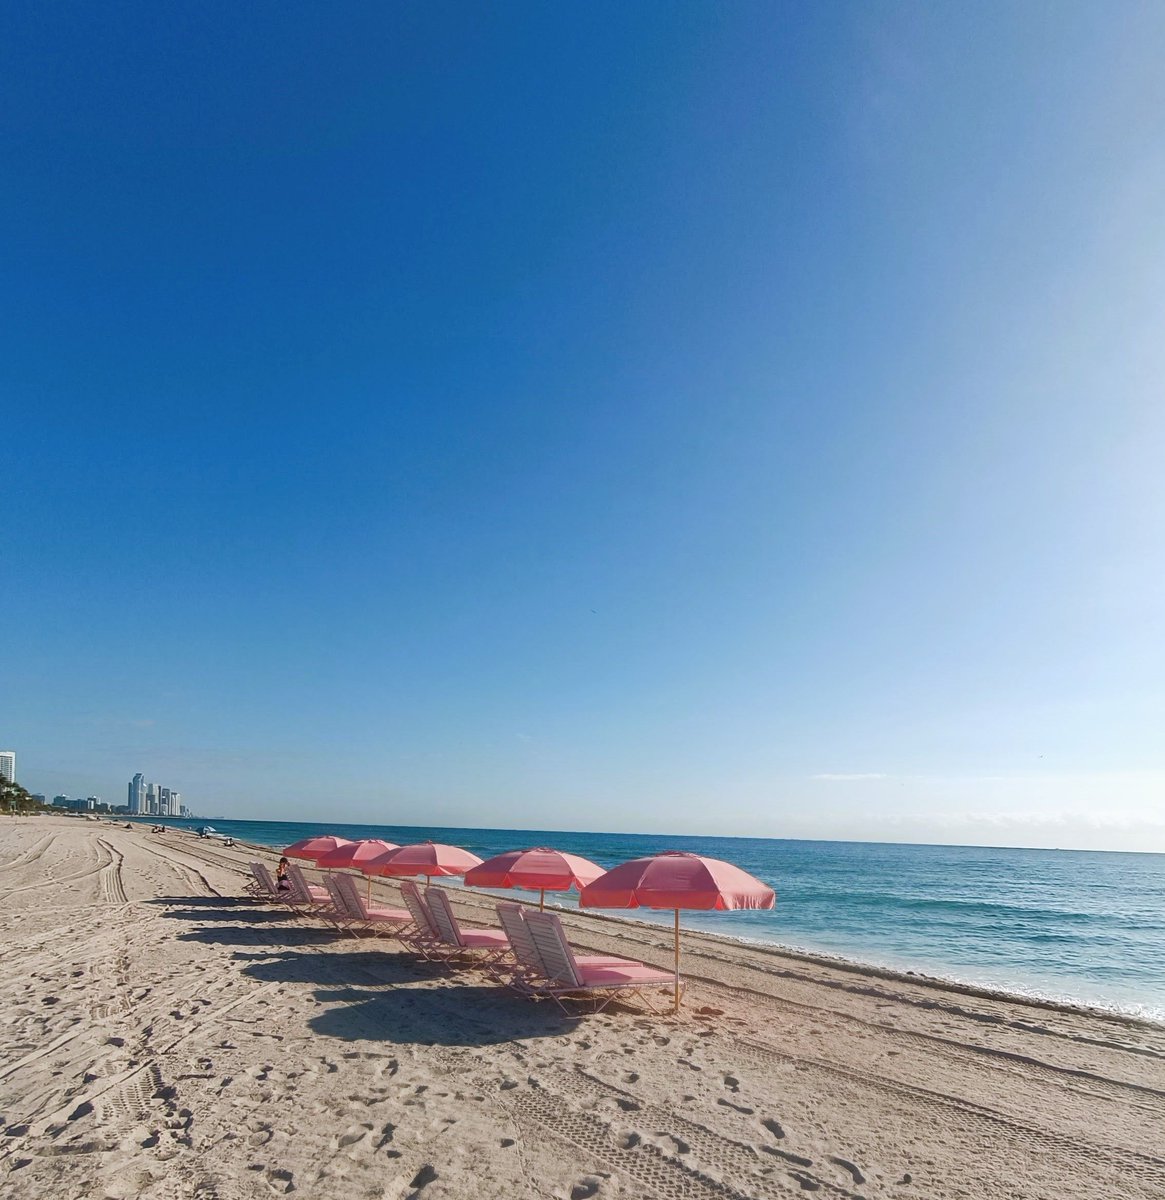 Every wave whispers serenity, every sunbeam paints perfection. 
Welcome to our picture-perfect beachfront in Miami. buff.ly/2J4OII7

#grandsurfside #gbsmoments #beachlife #miami #miamibeach #beachdays #miamimagic #miamiadventures #paradisefound #miamimoments